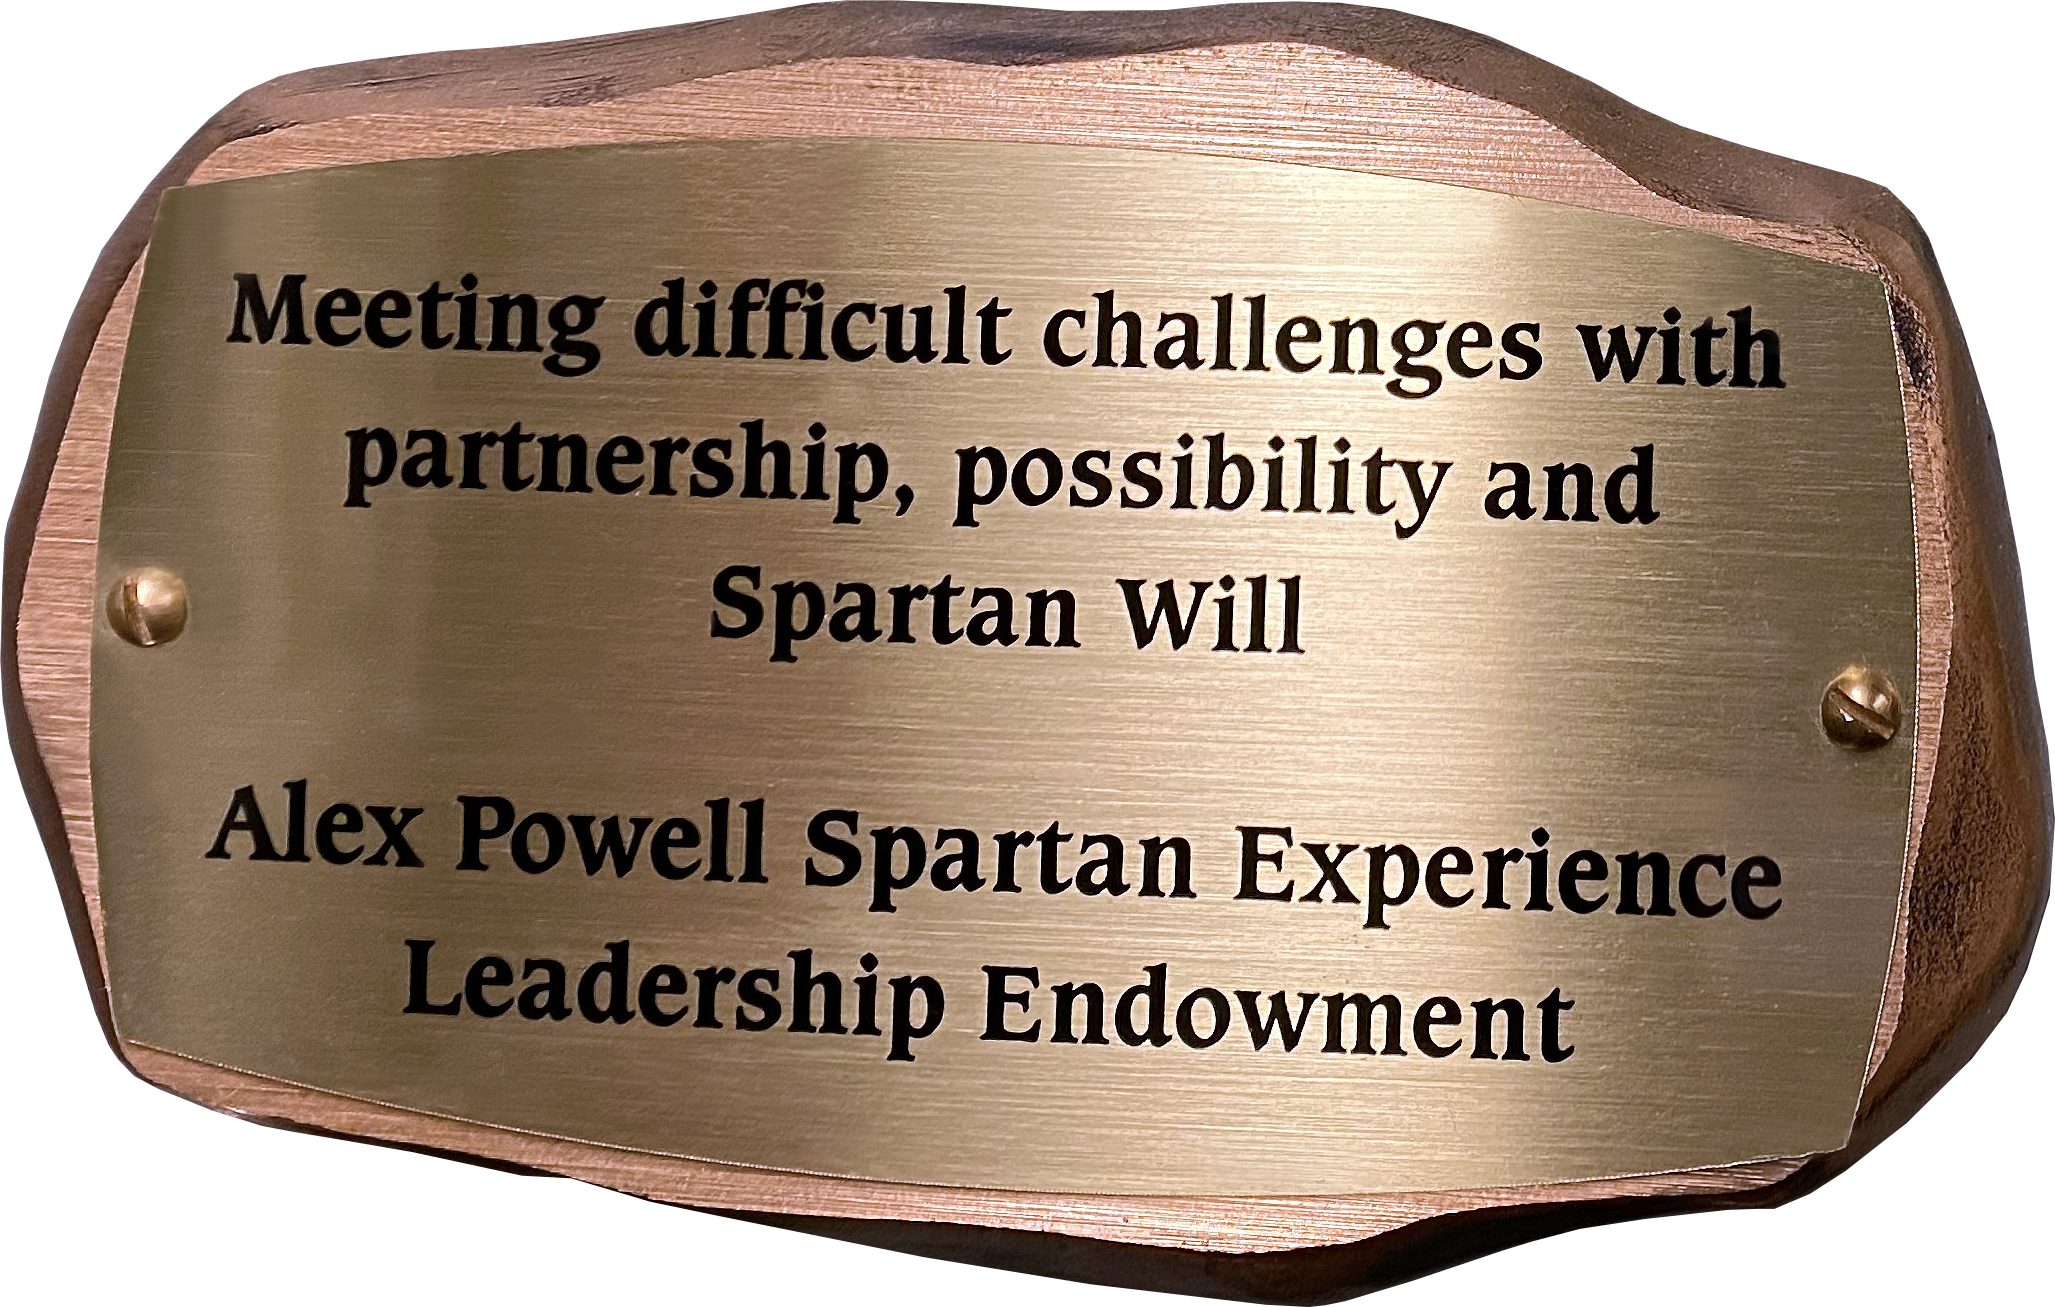 Inscribed bronze plaque in the shape of a rock with text on it reading: Meeting difficult challenges with partnership, possibility and Spartan Will. Alex Powell Spartan Experience Leadership Endowment